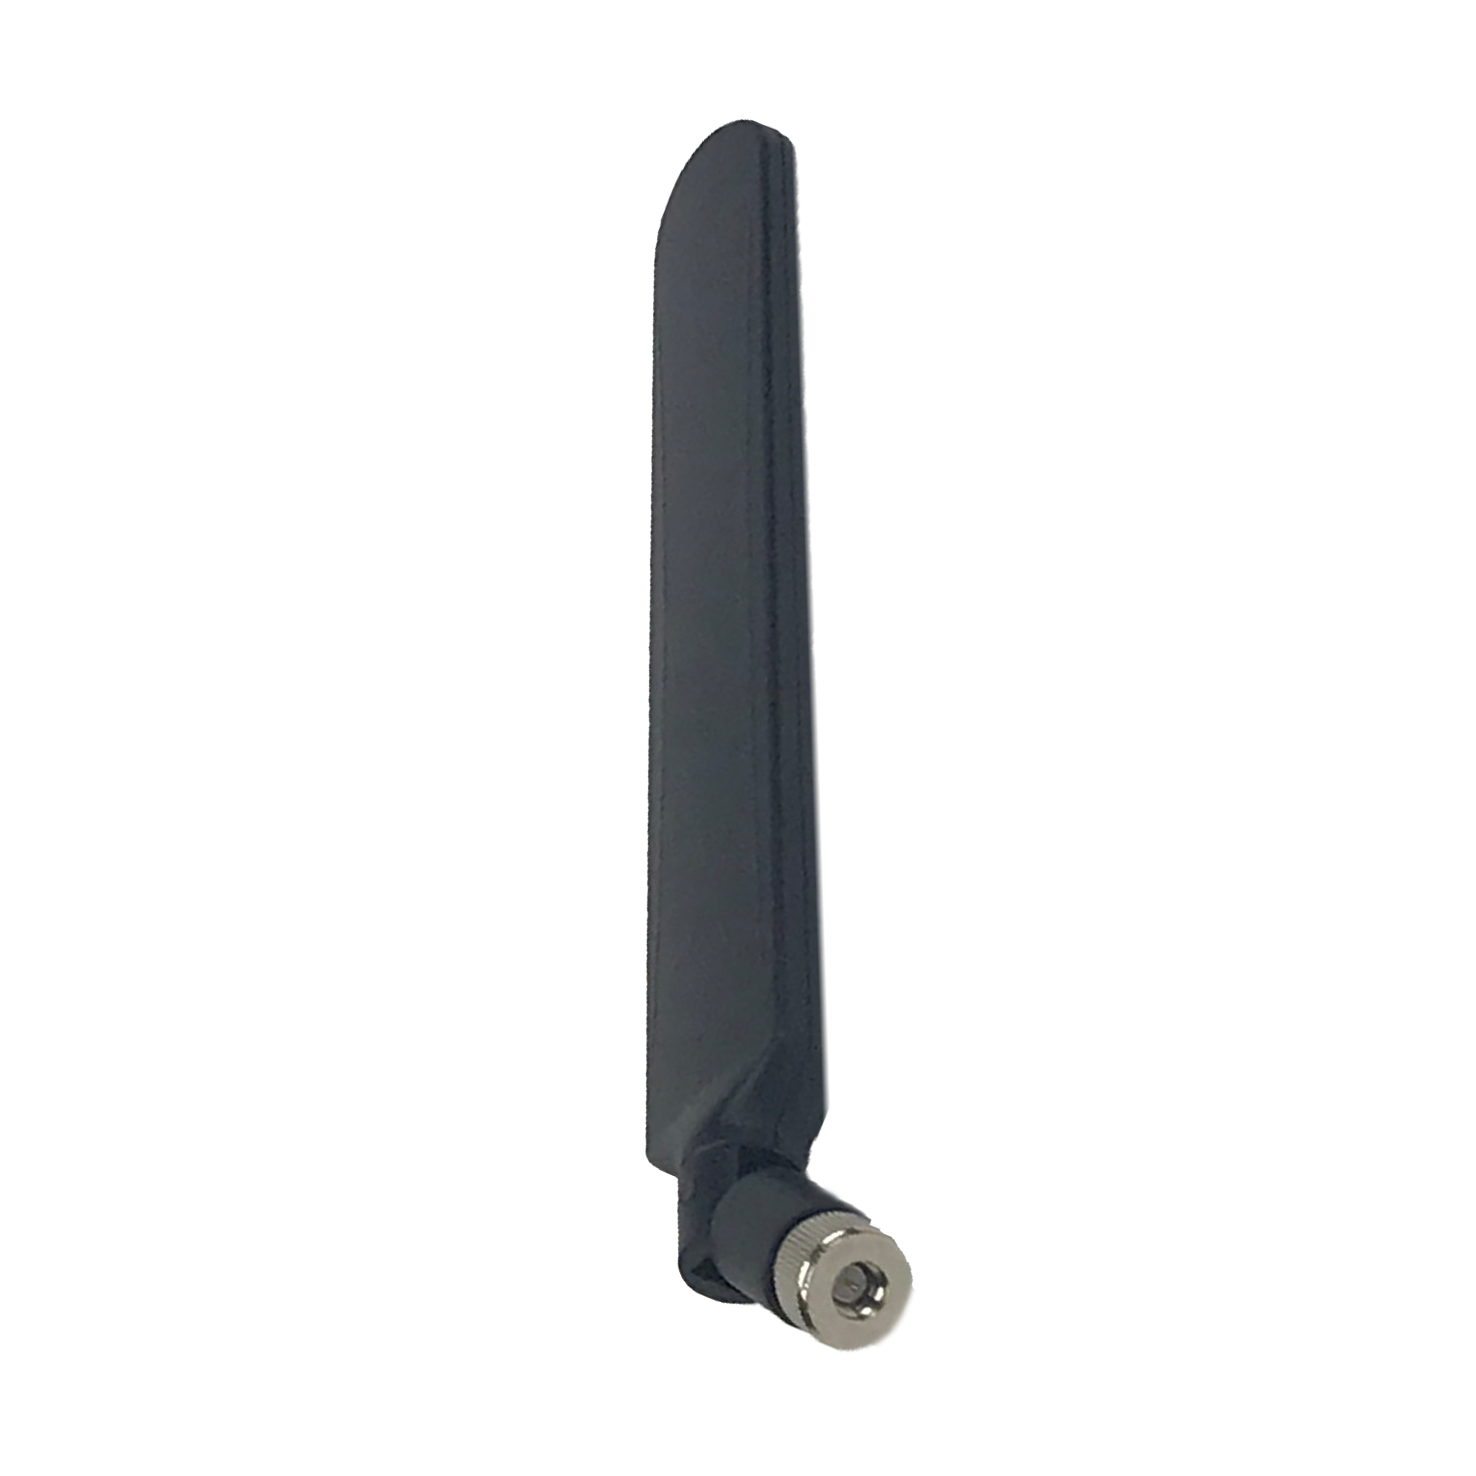 3G/4G/LTE Antenna for Cellular IoT. High Performance, High Efficiency for AT&T, Verizon, Sprint Carrier Certification.